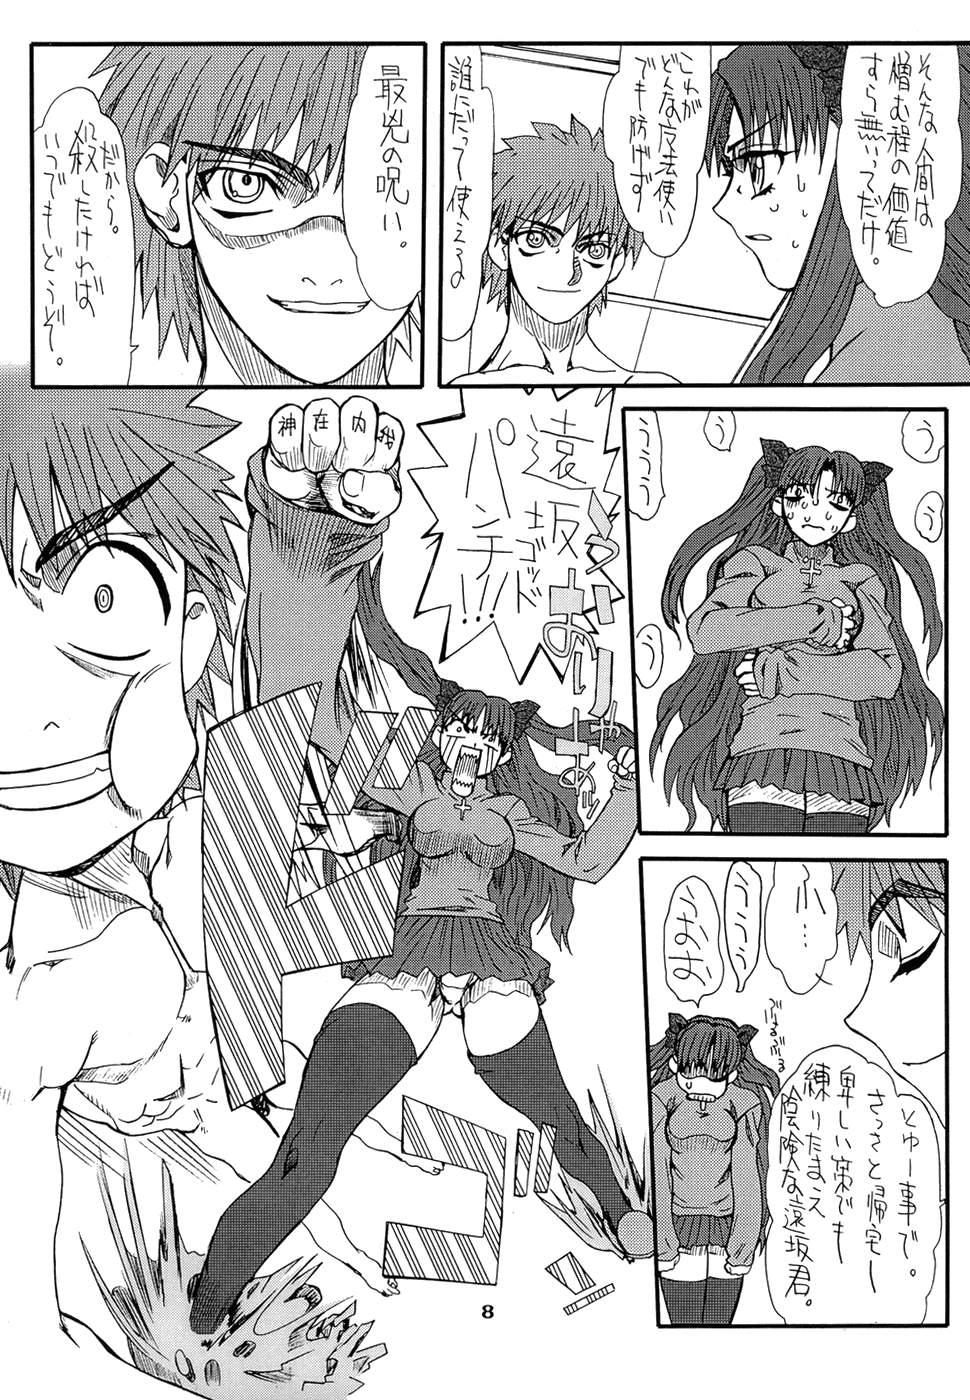 Weird Akihime San - Fate stay night Reverse - Page 8